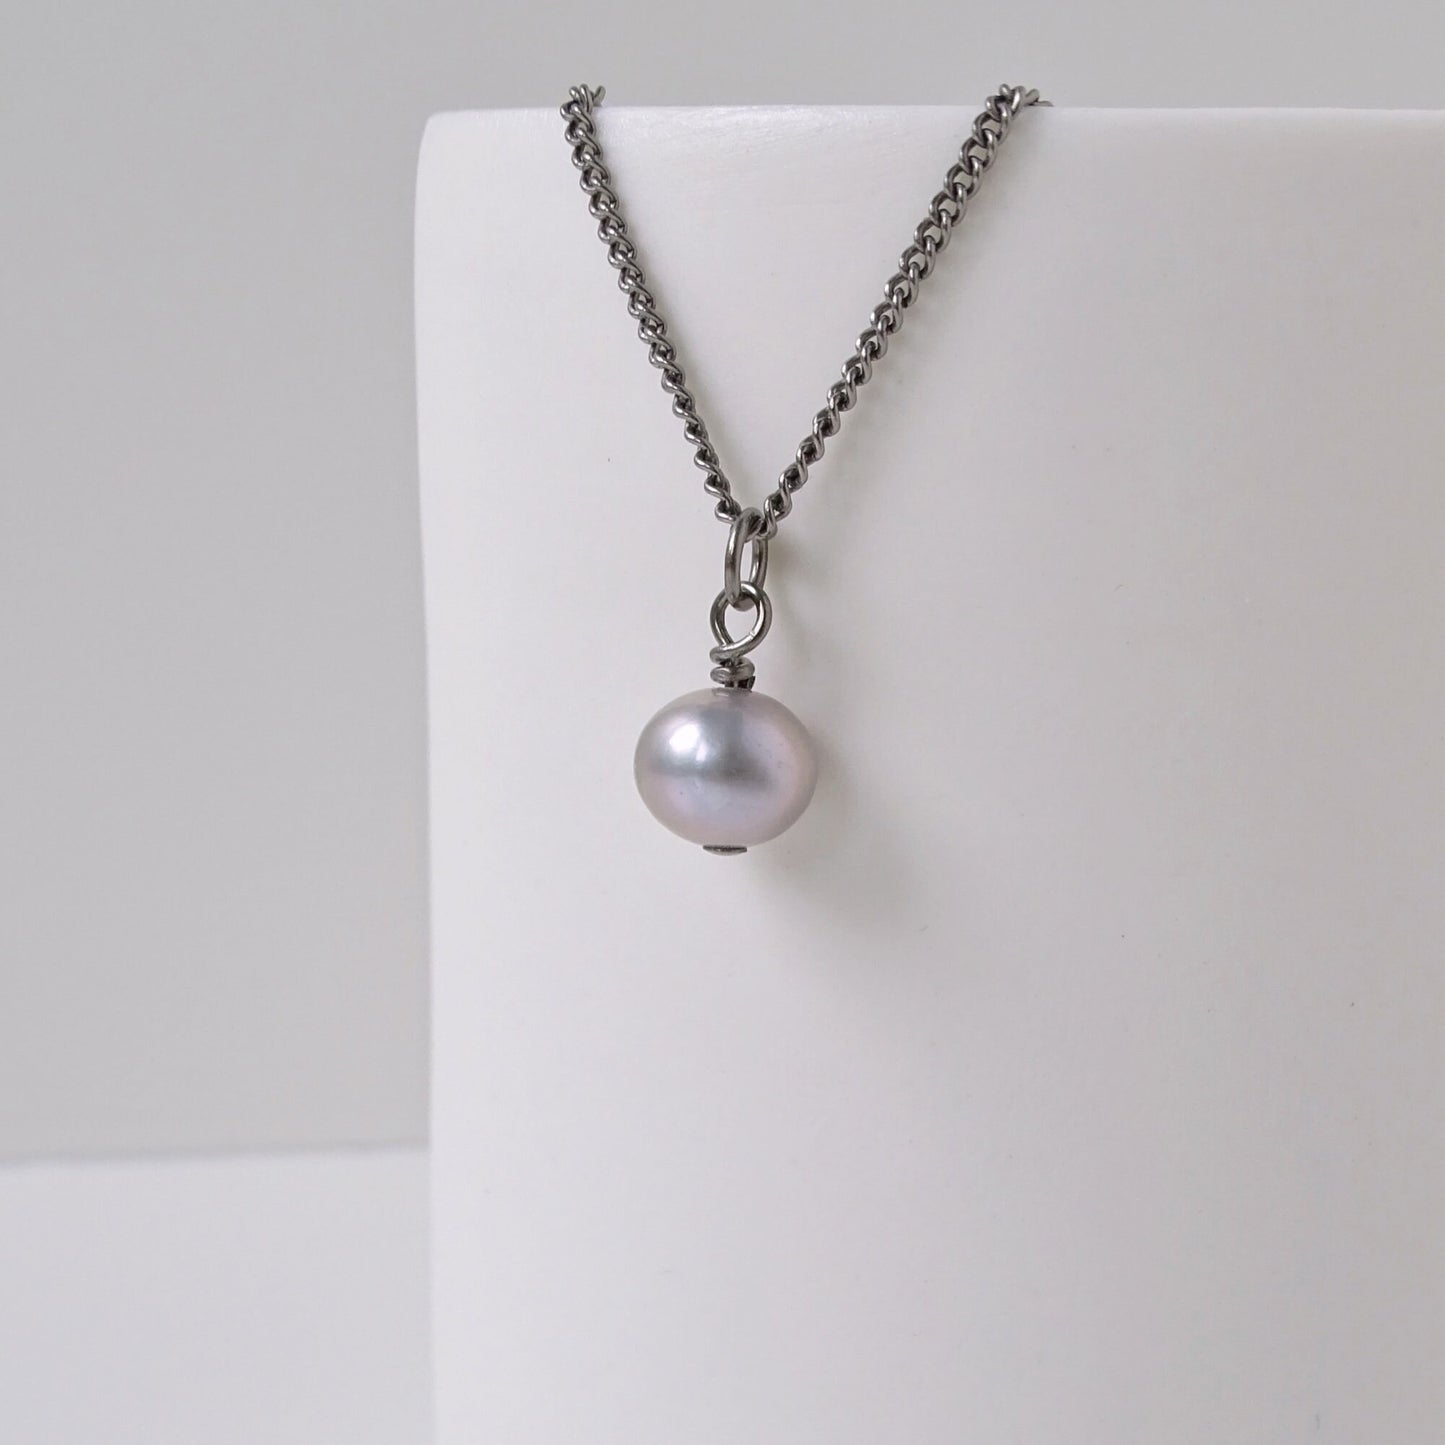 Gray Pearl Pendant Titanium Necklace, Real Pearl Necklace for Sensitive Skin, Freshwater Pearl Titanium Jewelry, Hypoallergenic Nickel Free